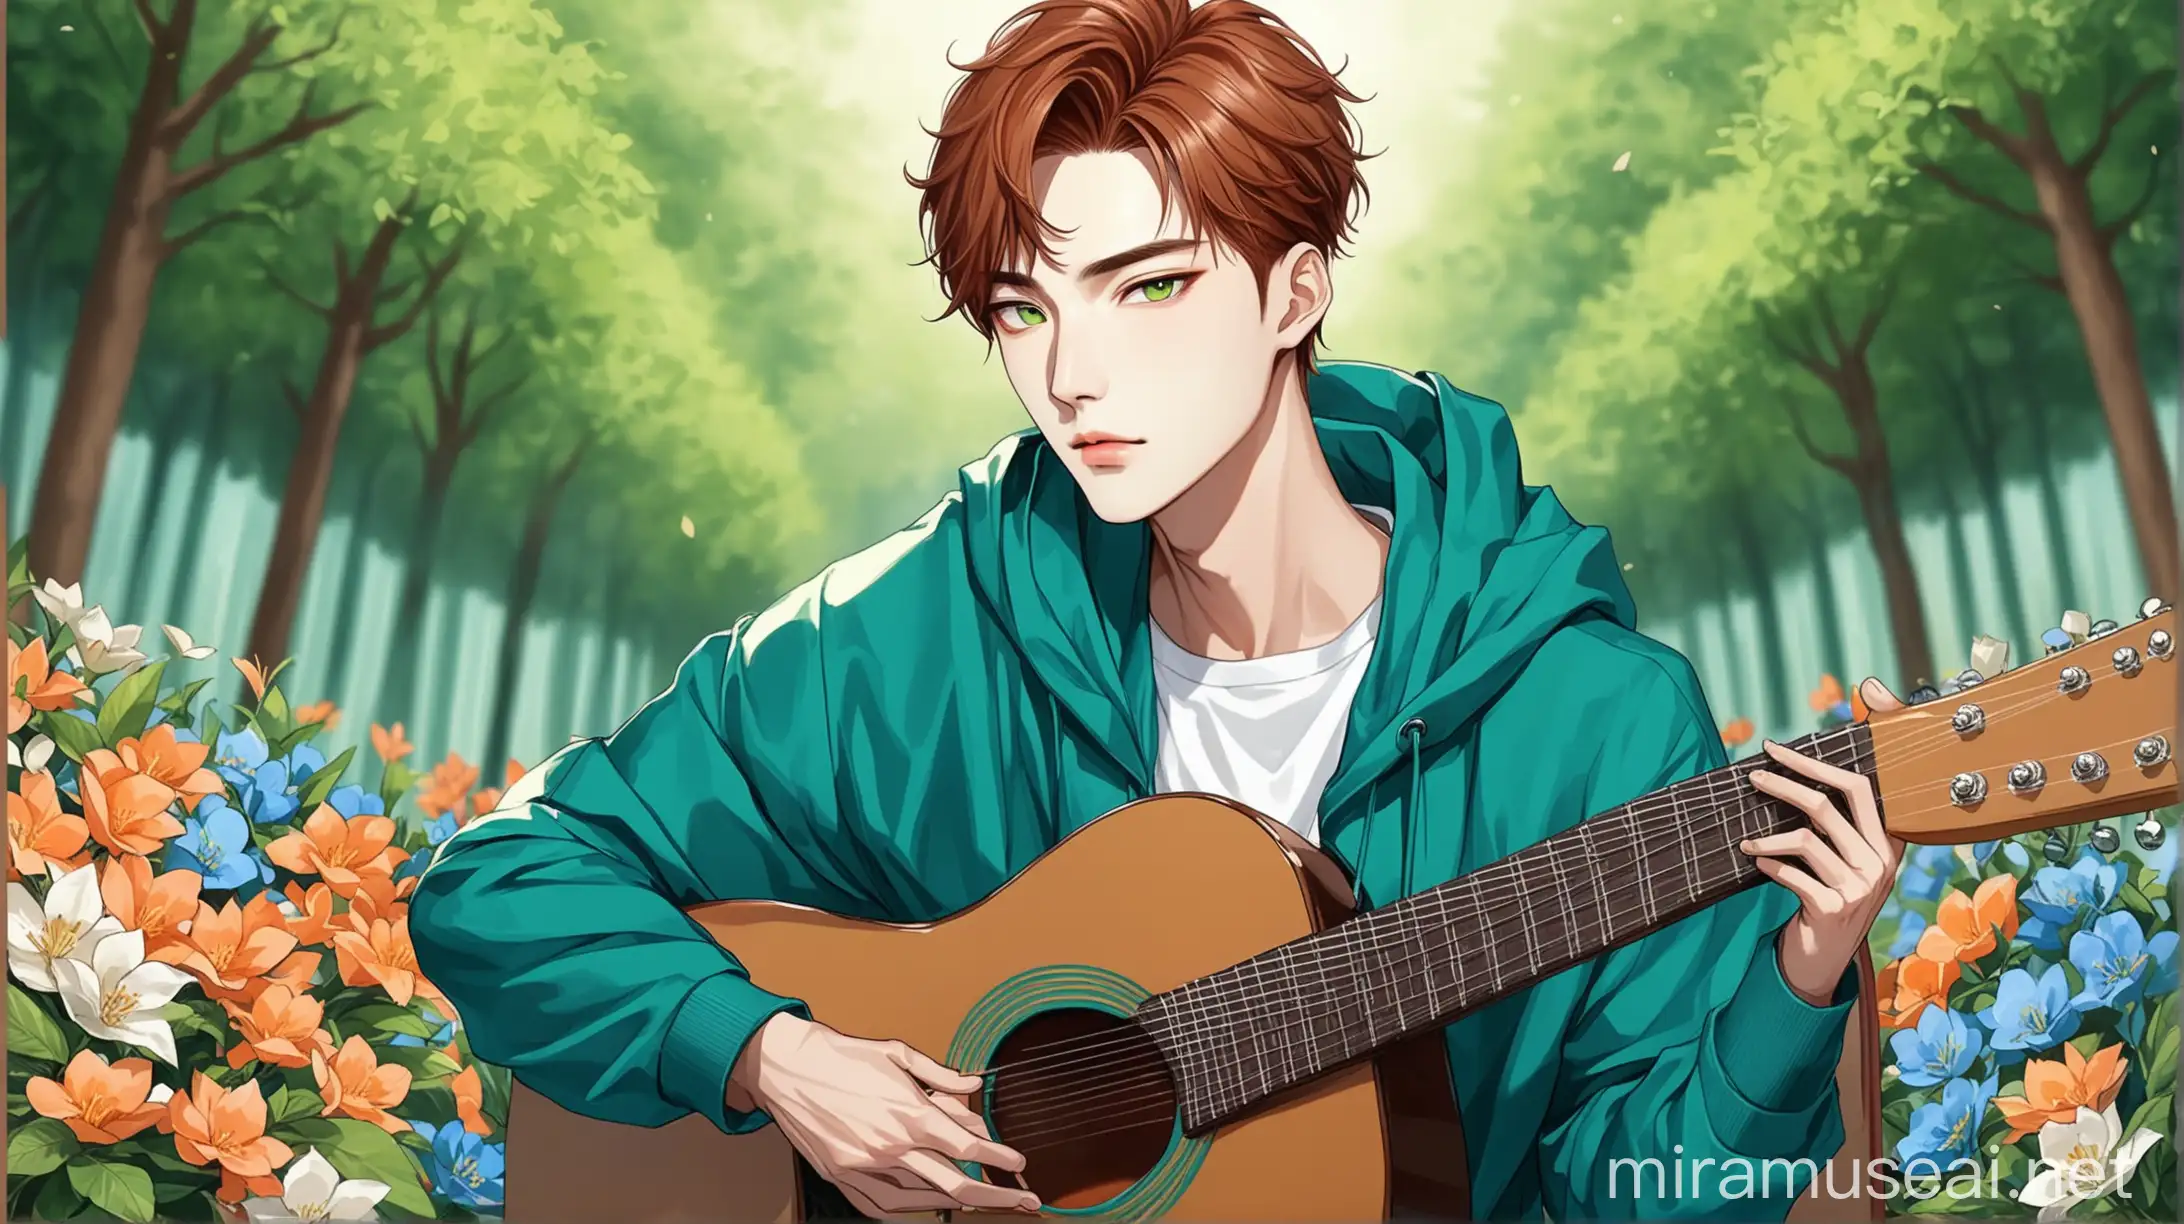 A very handsome attractive cool elegant looking Korean kpop male idol, facial features: (Reddish brown hair, green forest eyes, Bow shaped fuller down turned lips, straight upturned nose, almond upturned monolid fox eyes, oval v shaped jawline small face, soft angle shallow arched eyebrows )Wearing blue hoddie jacket and plain white tshirt and pant sitting in chair, singing and playing guitar in a beautiful aesthetic flower garden 